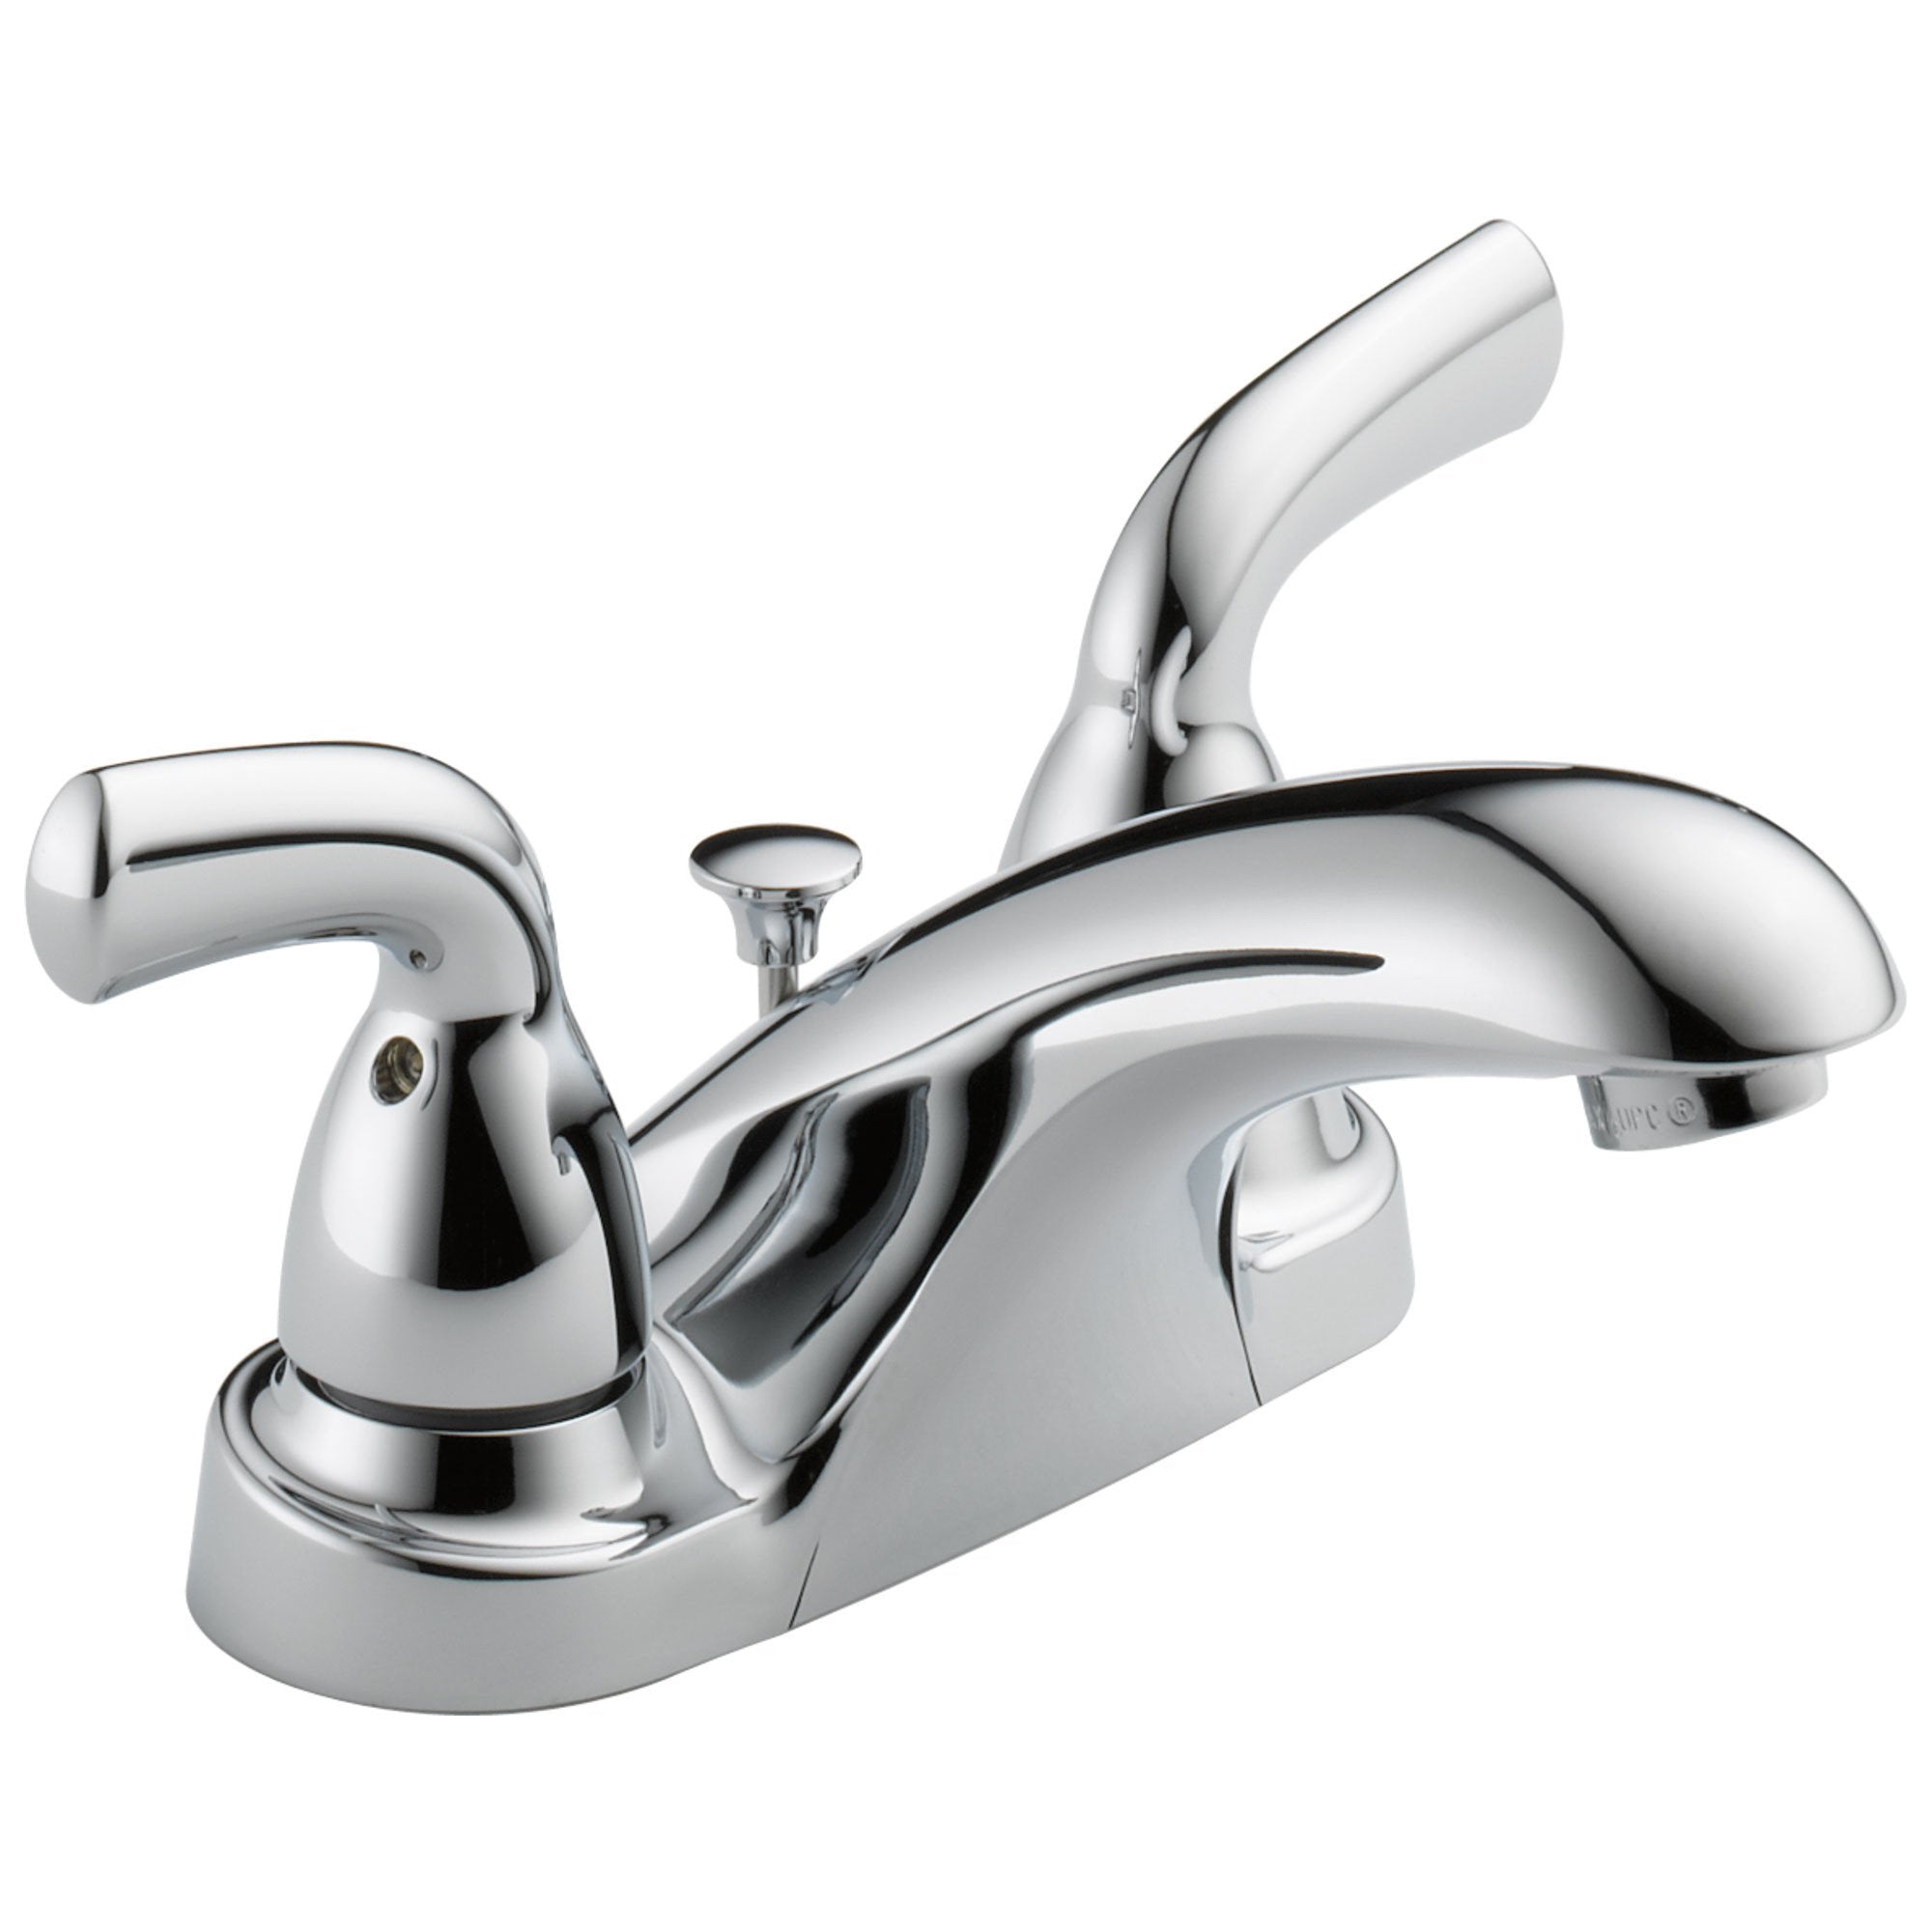 Delta Foundations Collection Chrome Finish Two Handle Centerset Lavatory Bathroom Sink Faucet 532542